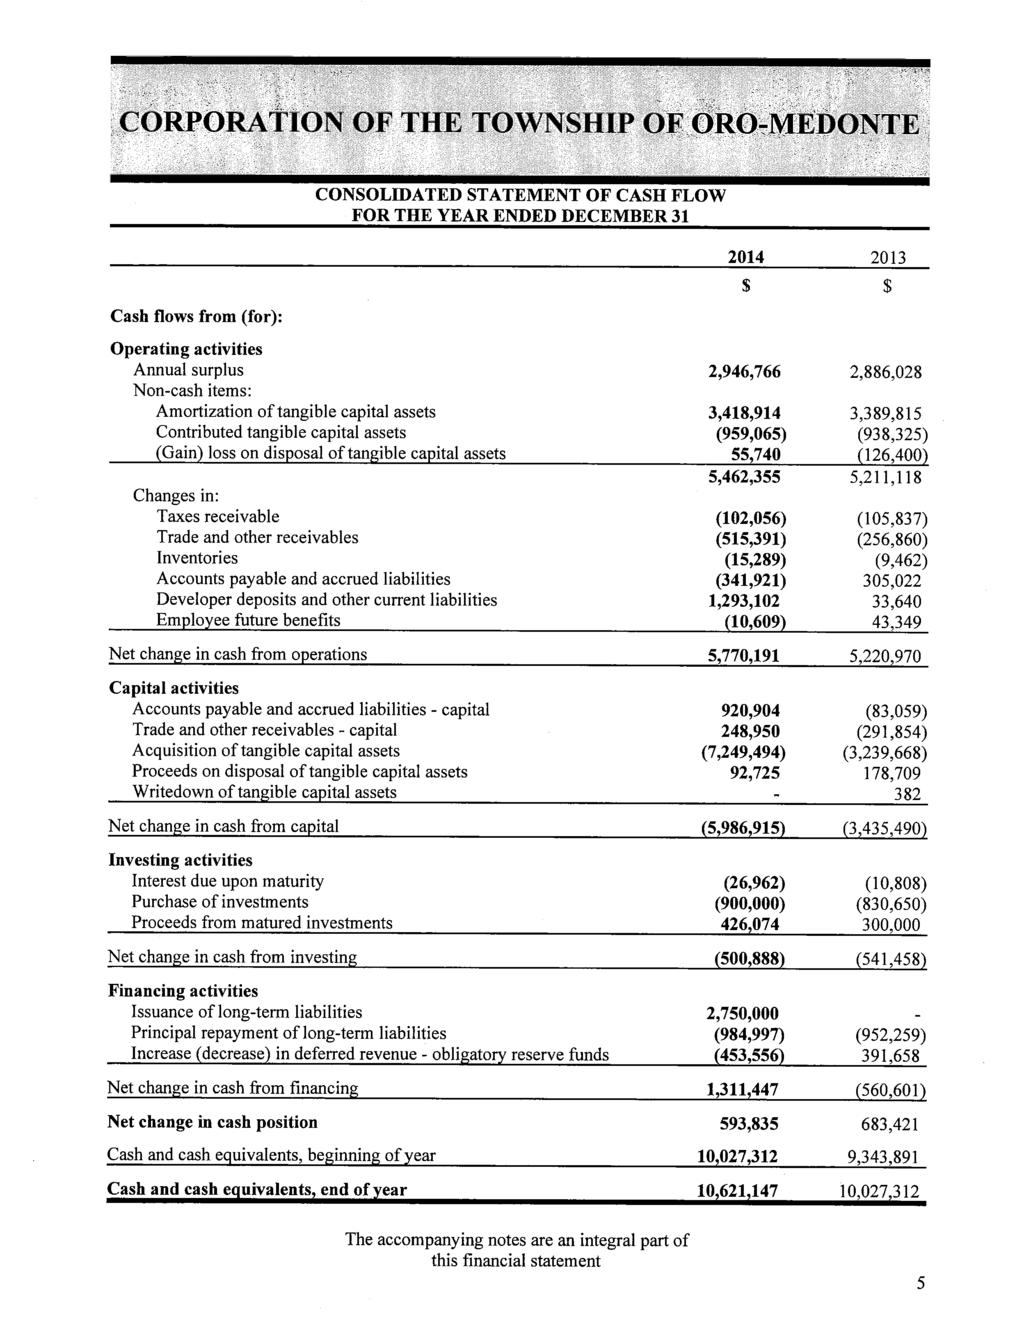 CONSOLIDATED STATEMENT OF CASH FLOW FOR THE YEAR ENDED DECEMBER 31 2014 2013 Cash flows from (for): Operating activities Annual surplus Non-cash items: Amortization of tangible capital assets